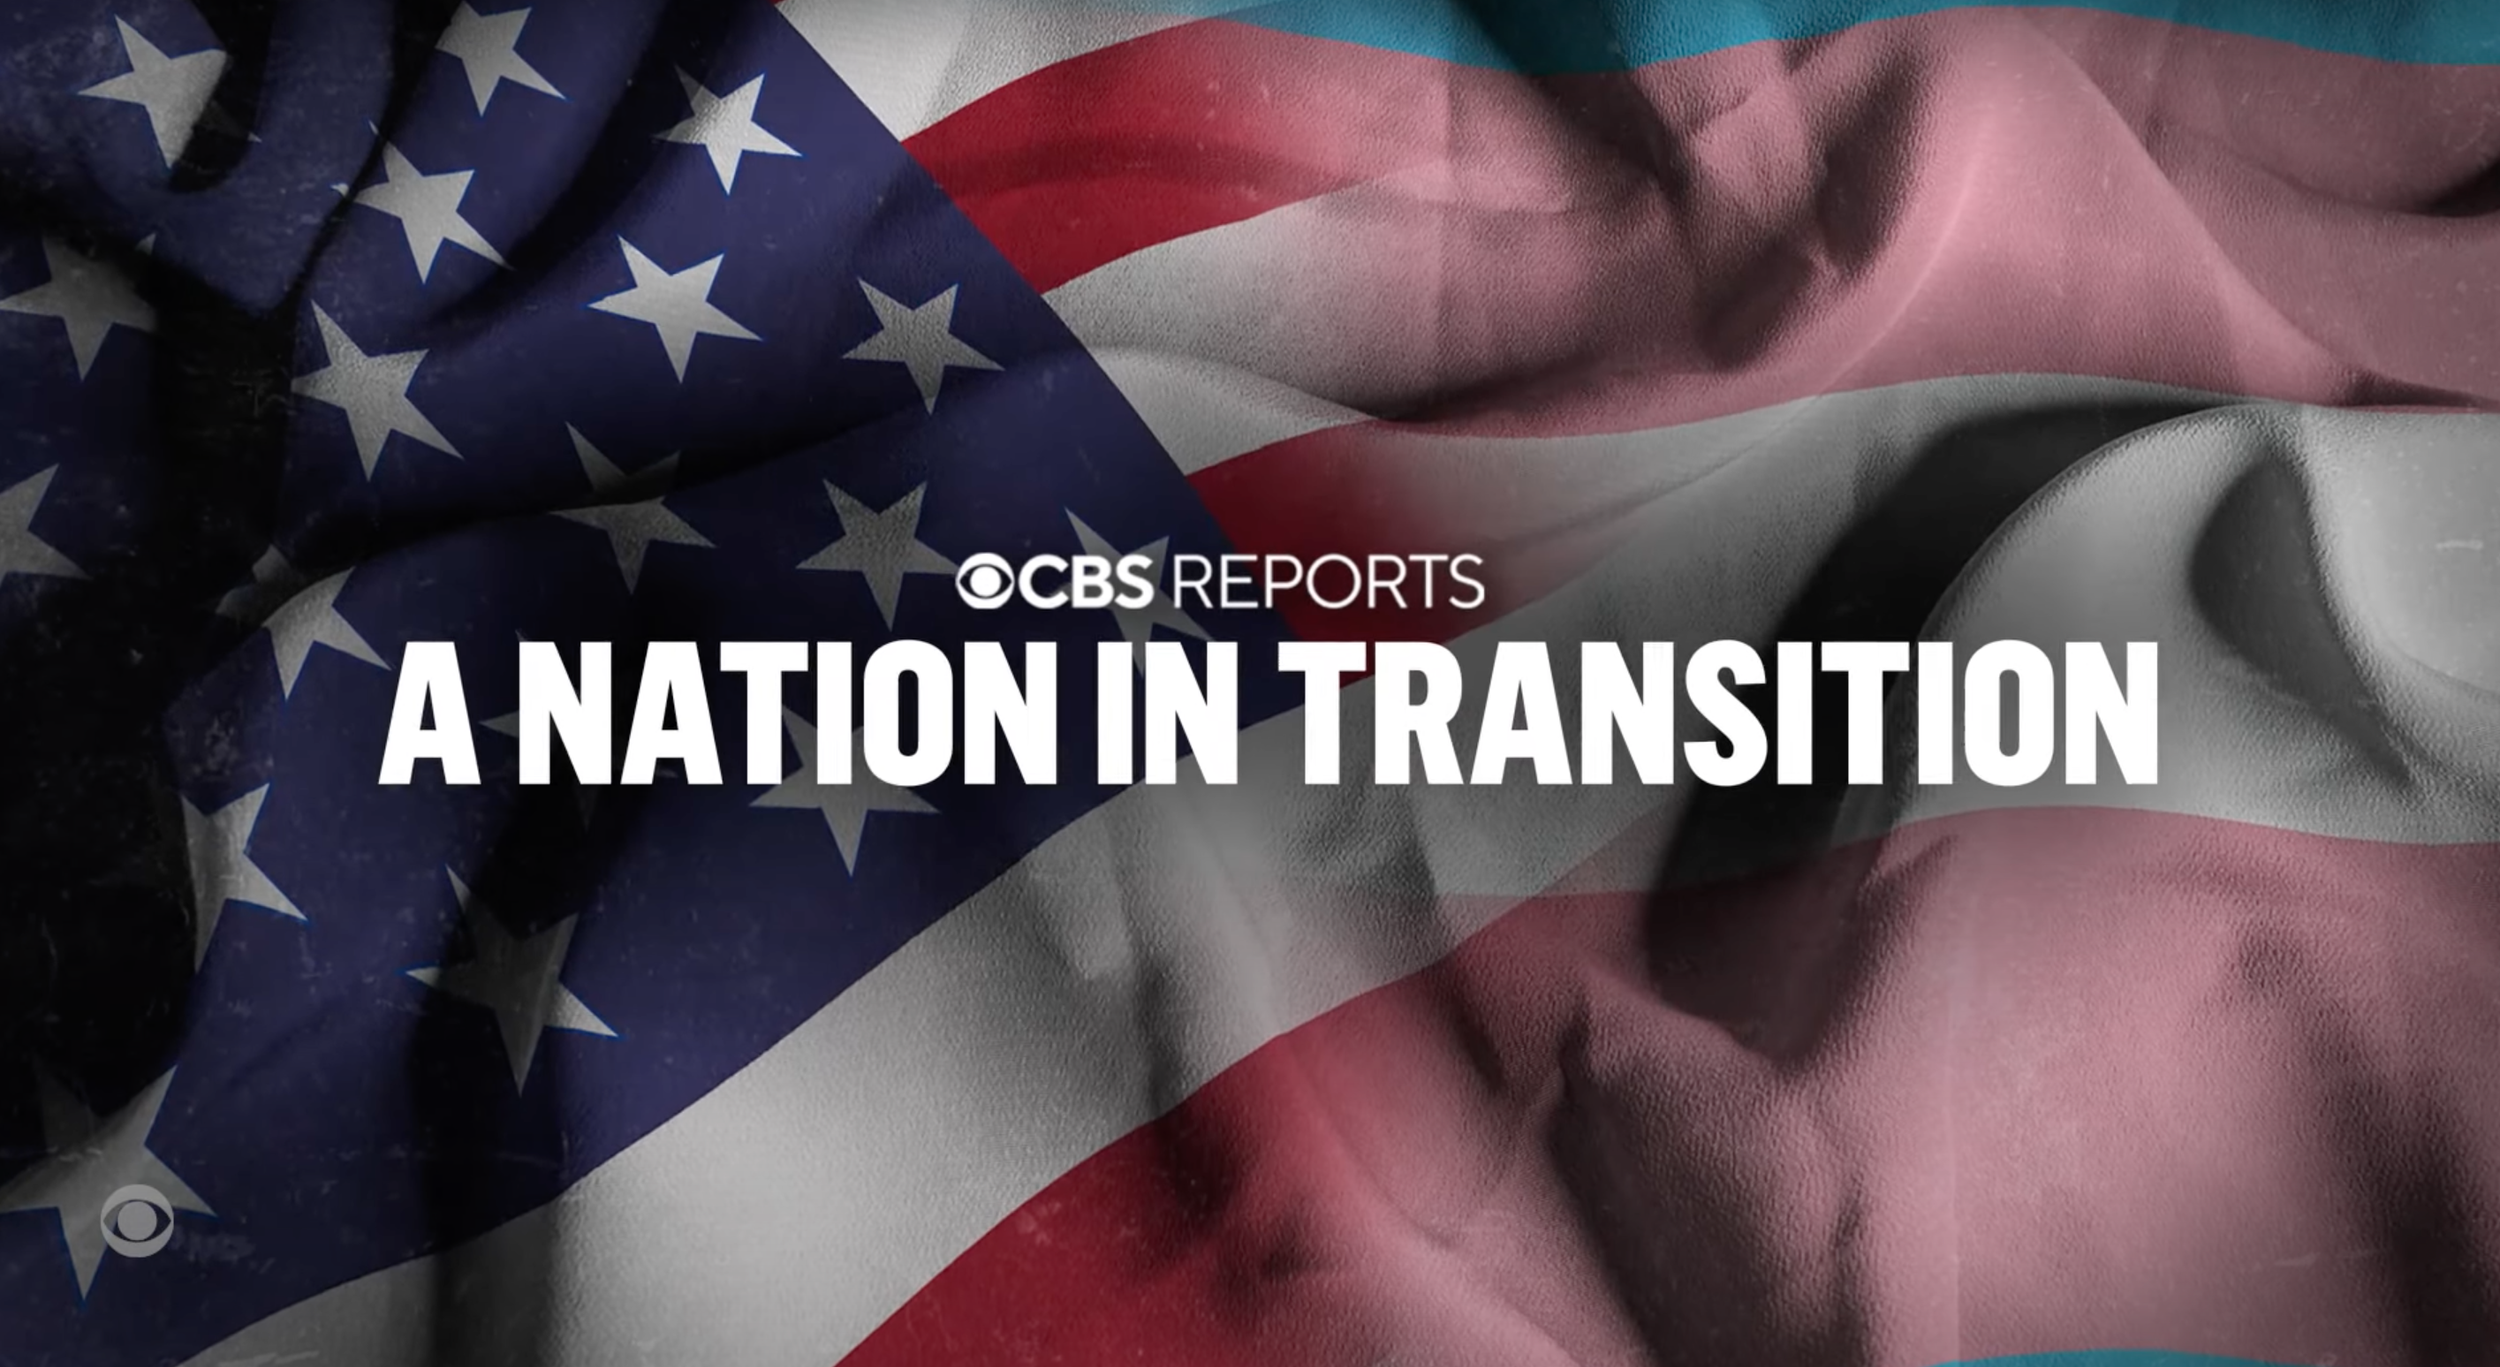 A Nation in Transition